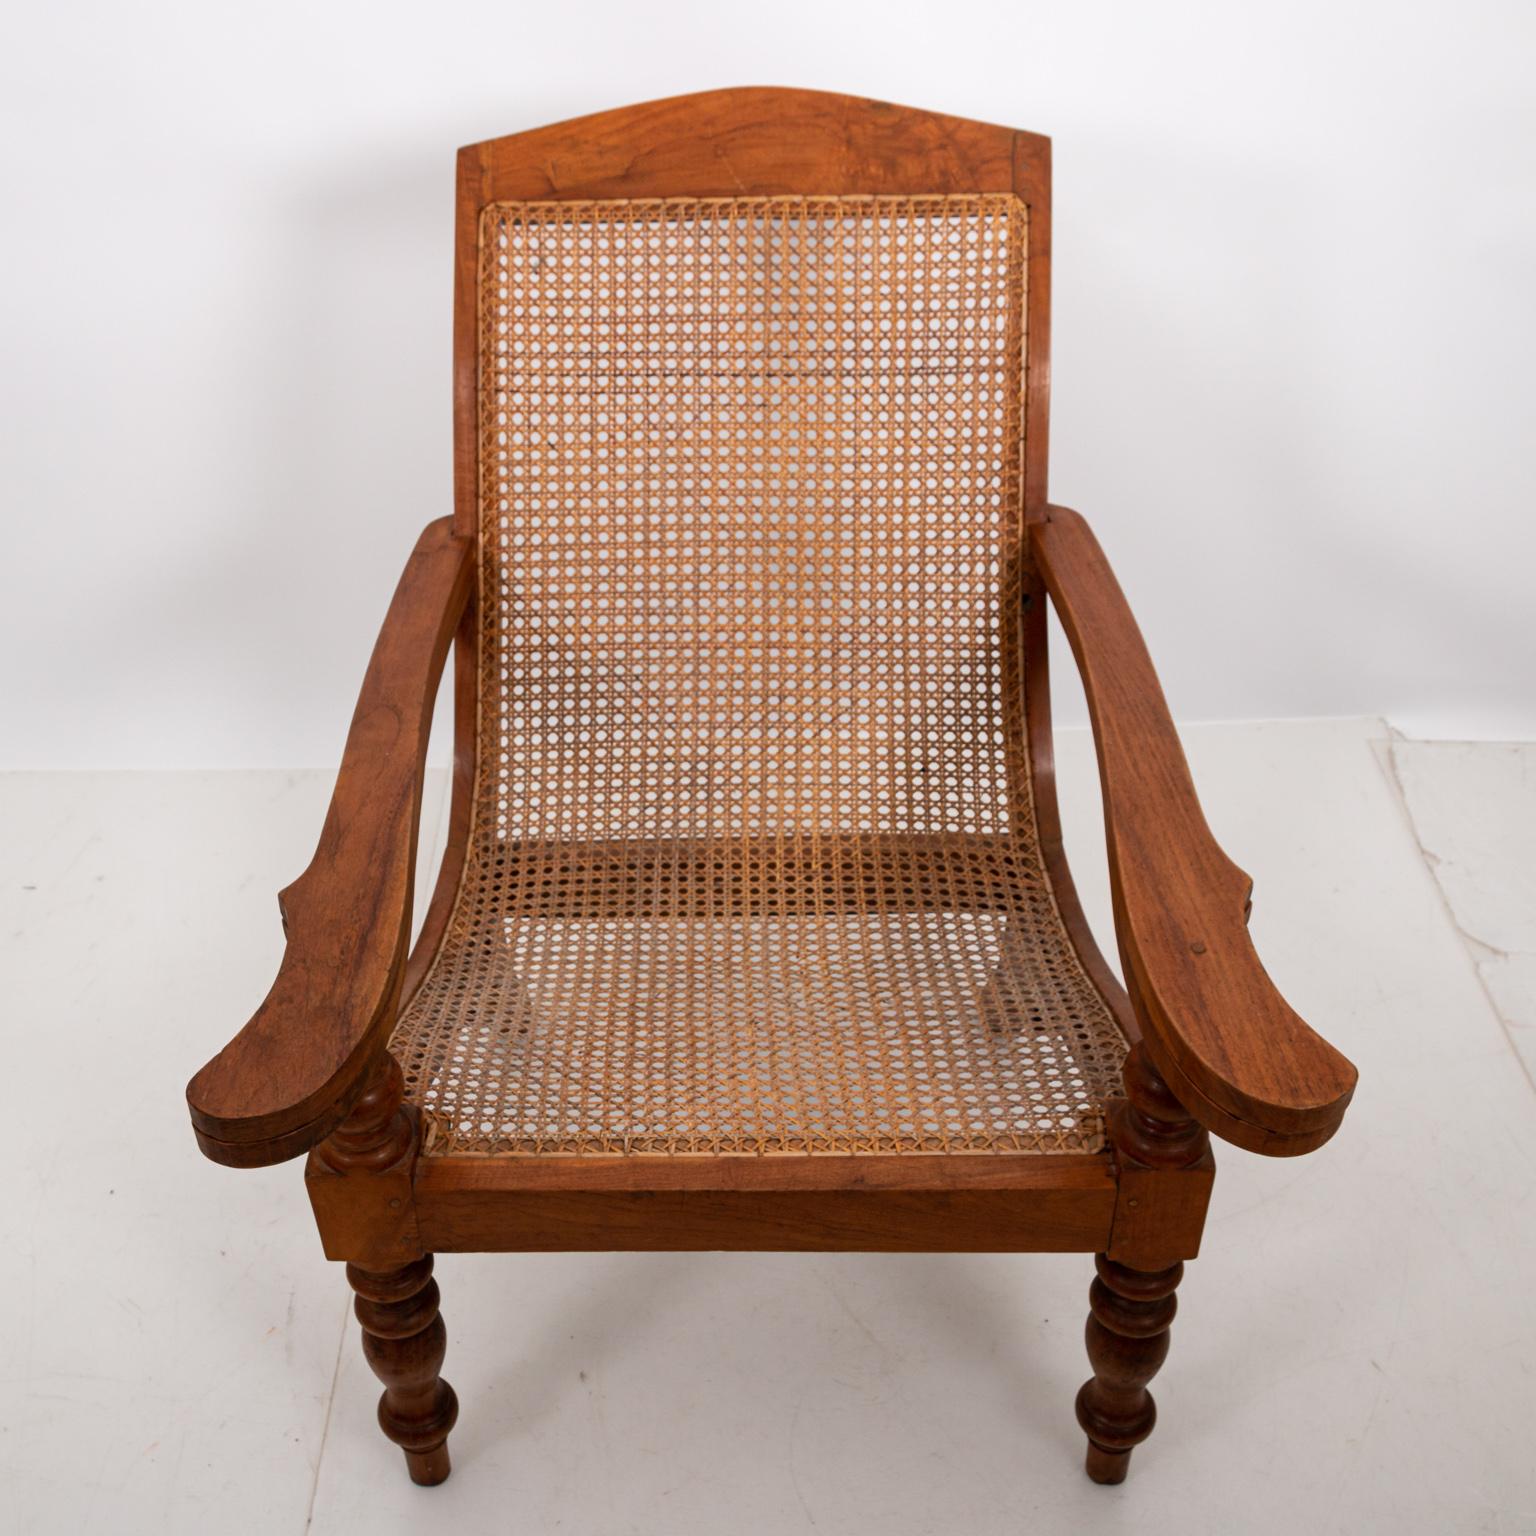 Anglo-Indian Teakwood and Cane Plantation Chair  5